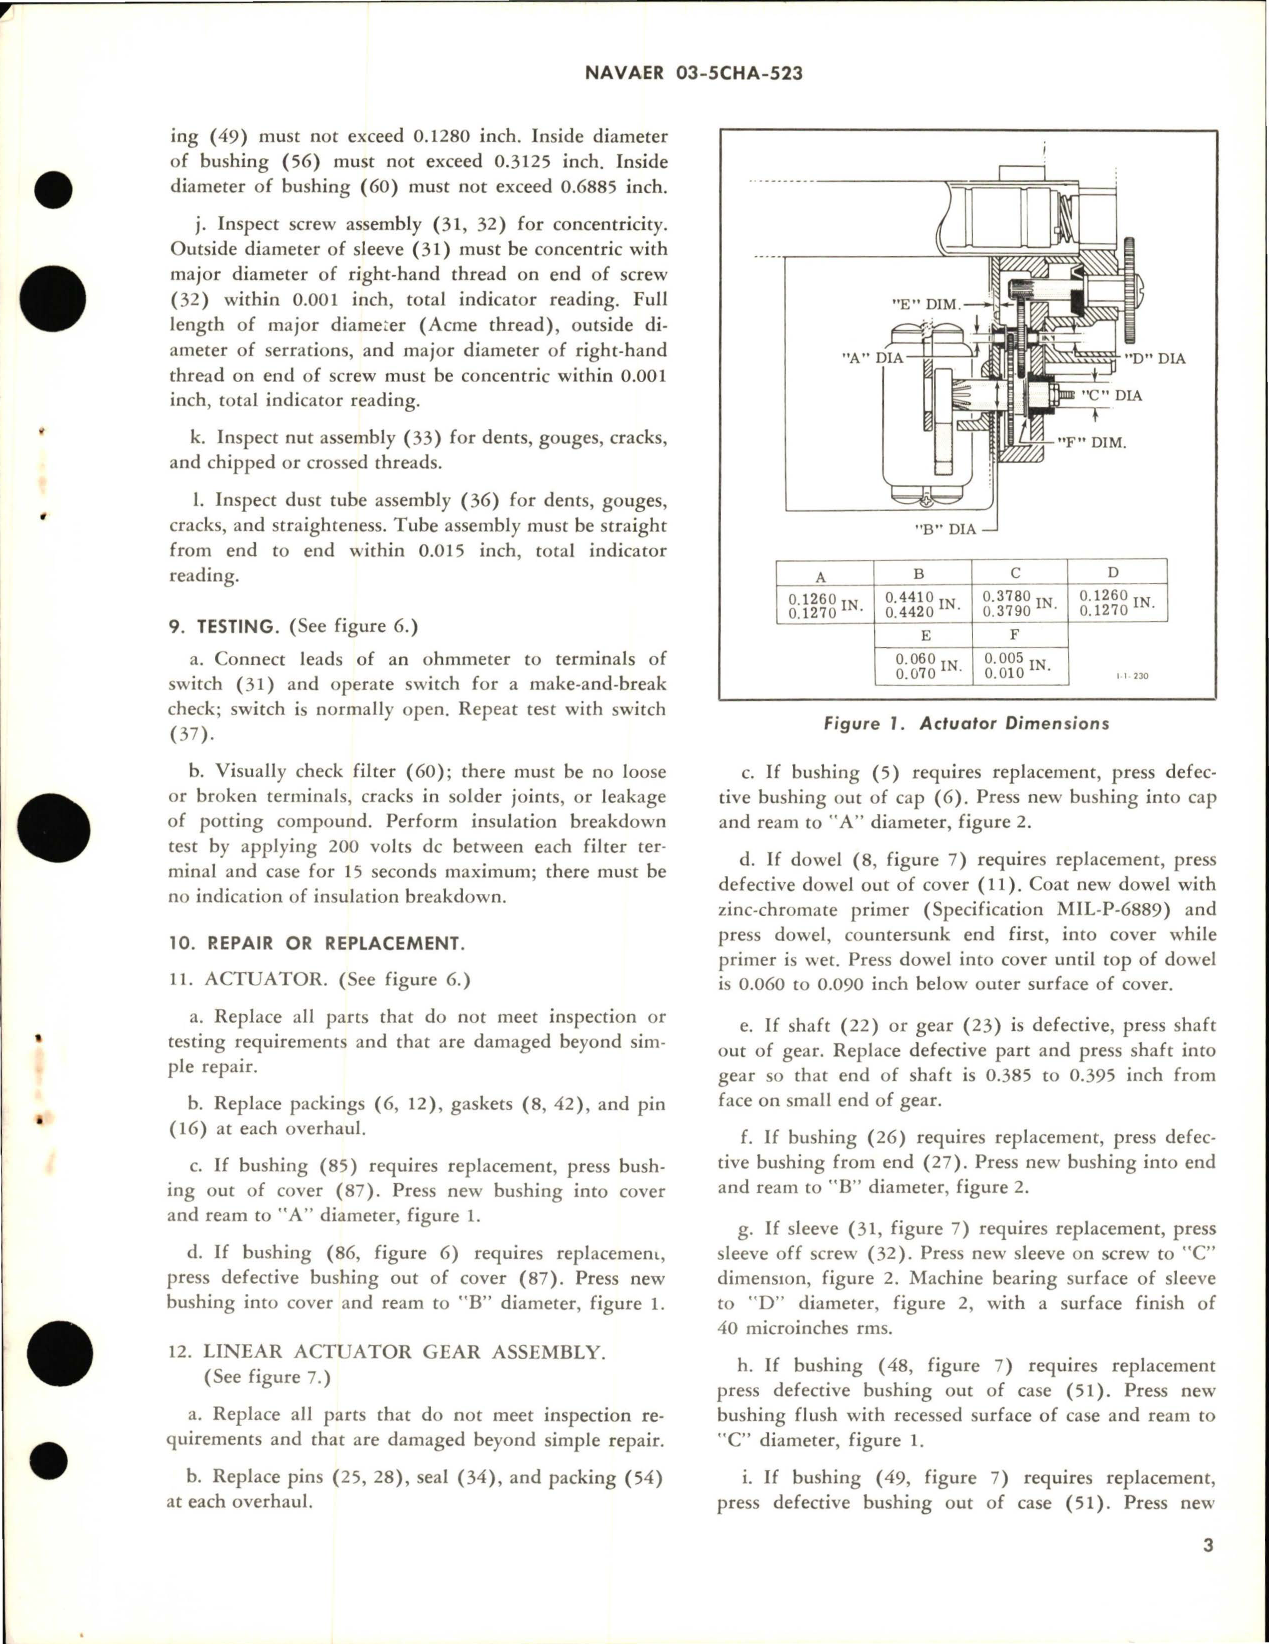 Sample page 5 from AirCorps Library document: Overhaul Instructions with Parts Breakdown for Linear Actuator - Part 29642-4 - Model ELA20-45-1